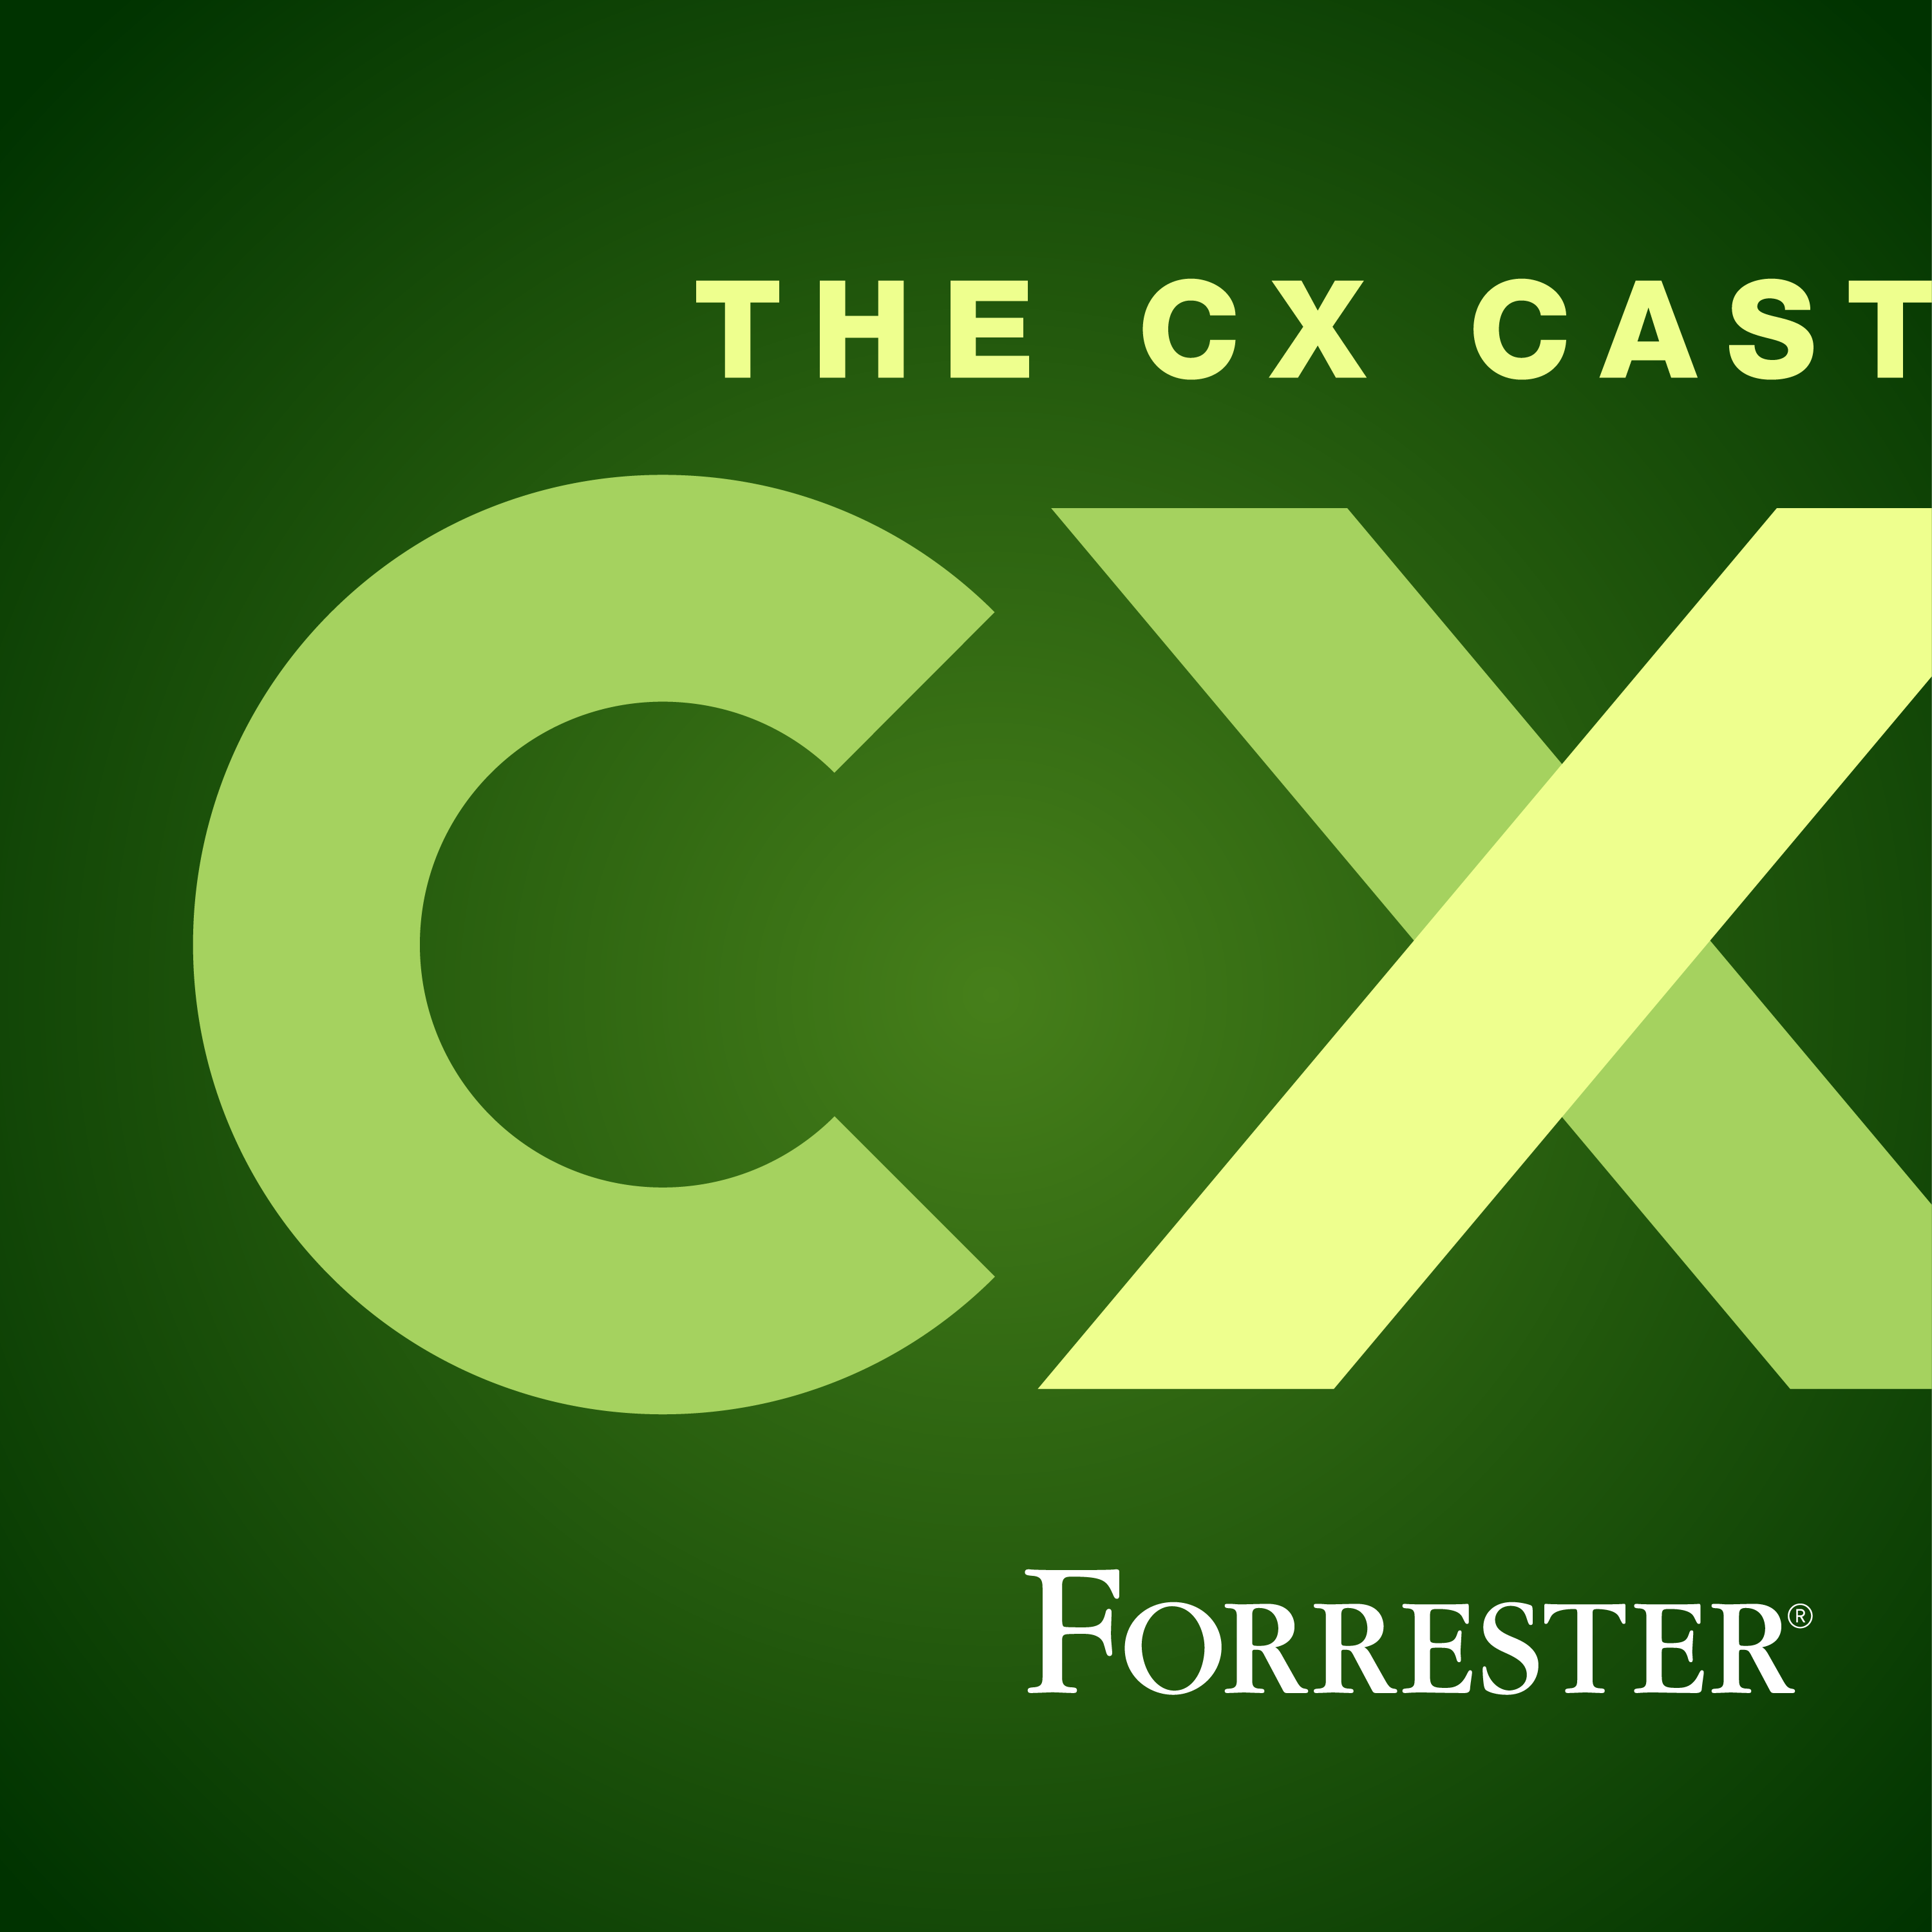 The CX Cast ® by Forrester